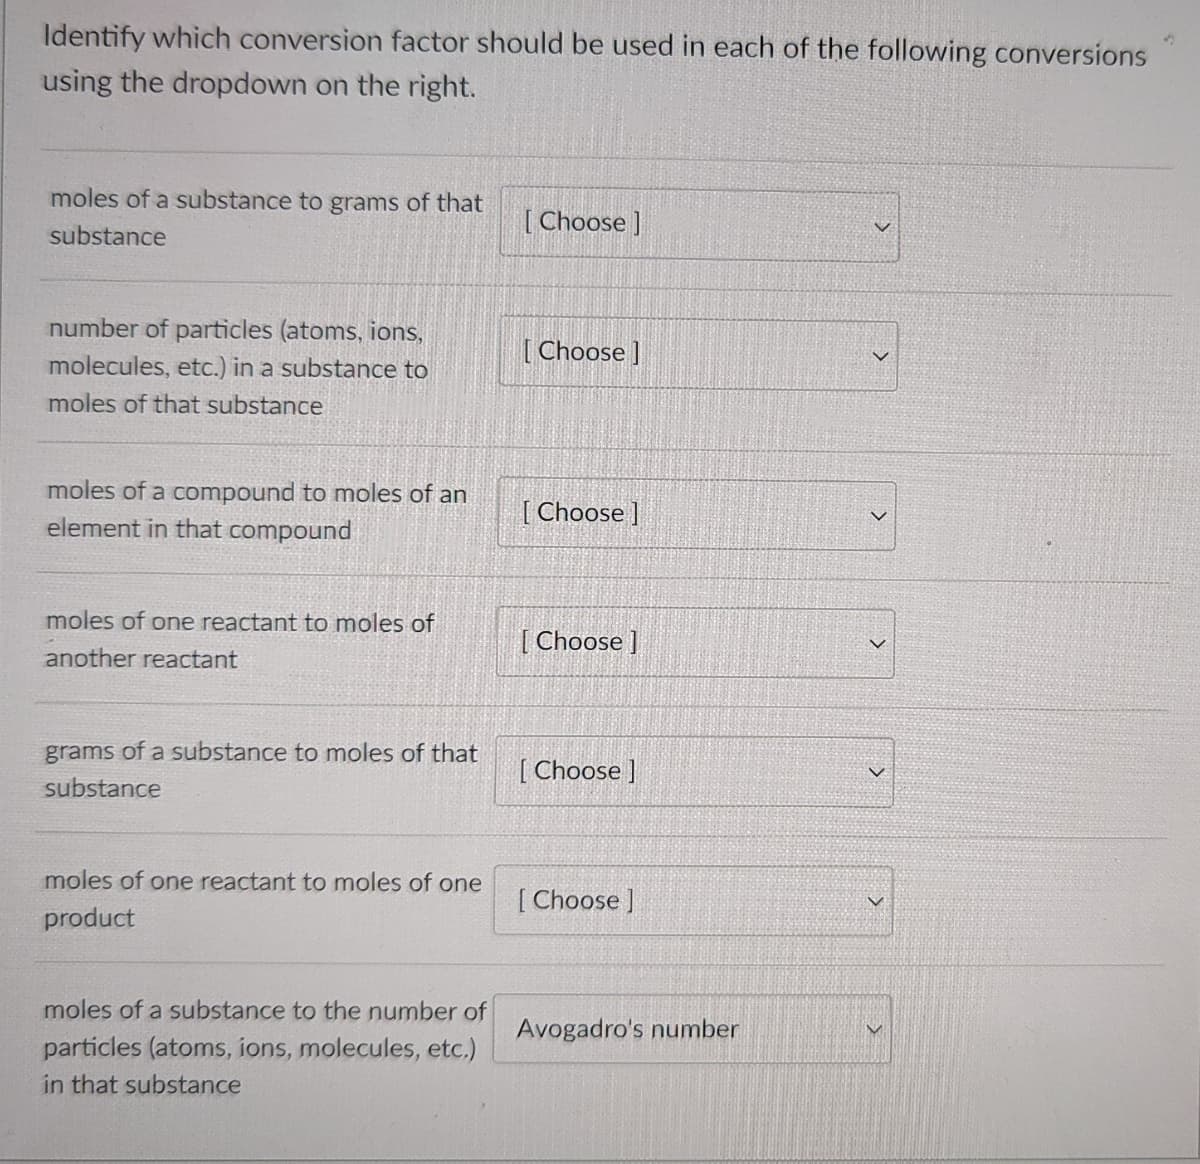 Identify which conversion factor should be used in each of the following conversions
using the dropdown on the right.
moles of a substance to grams of that
[ Choose ]
substance
number of particles (atoms, ions,
[ Choose ]
molecules, etc.) in a substance to
moles of that substance
moles of a compound to moles of an
element in that compound
[ Choose ]
moles of one reactant to moles of
[ Choose ]
another reactant
grams of a substance to moles of that
[ Choose ]
substance
moles of one reactant to moles of one
[ Choose ]
product
moles of a substance to the number of
Avogadro's number
particles (atoms, ions, molecules, etc.)
in that substance
